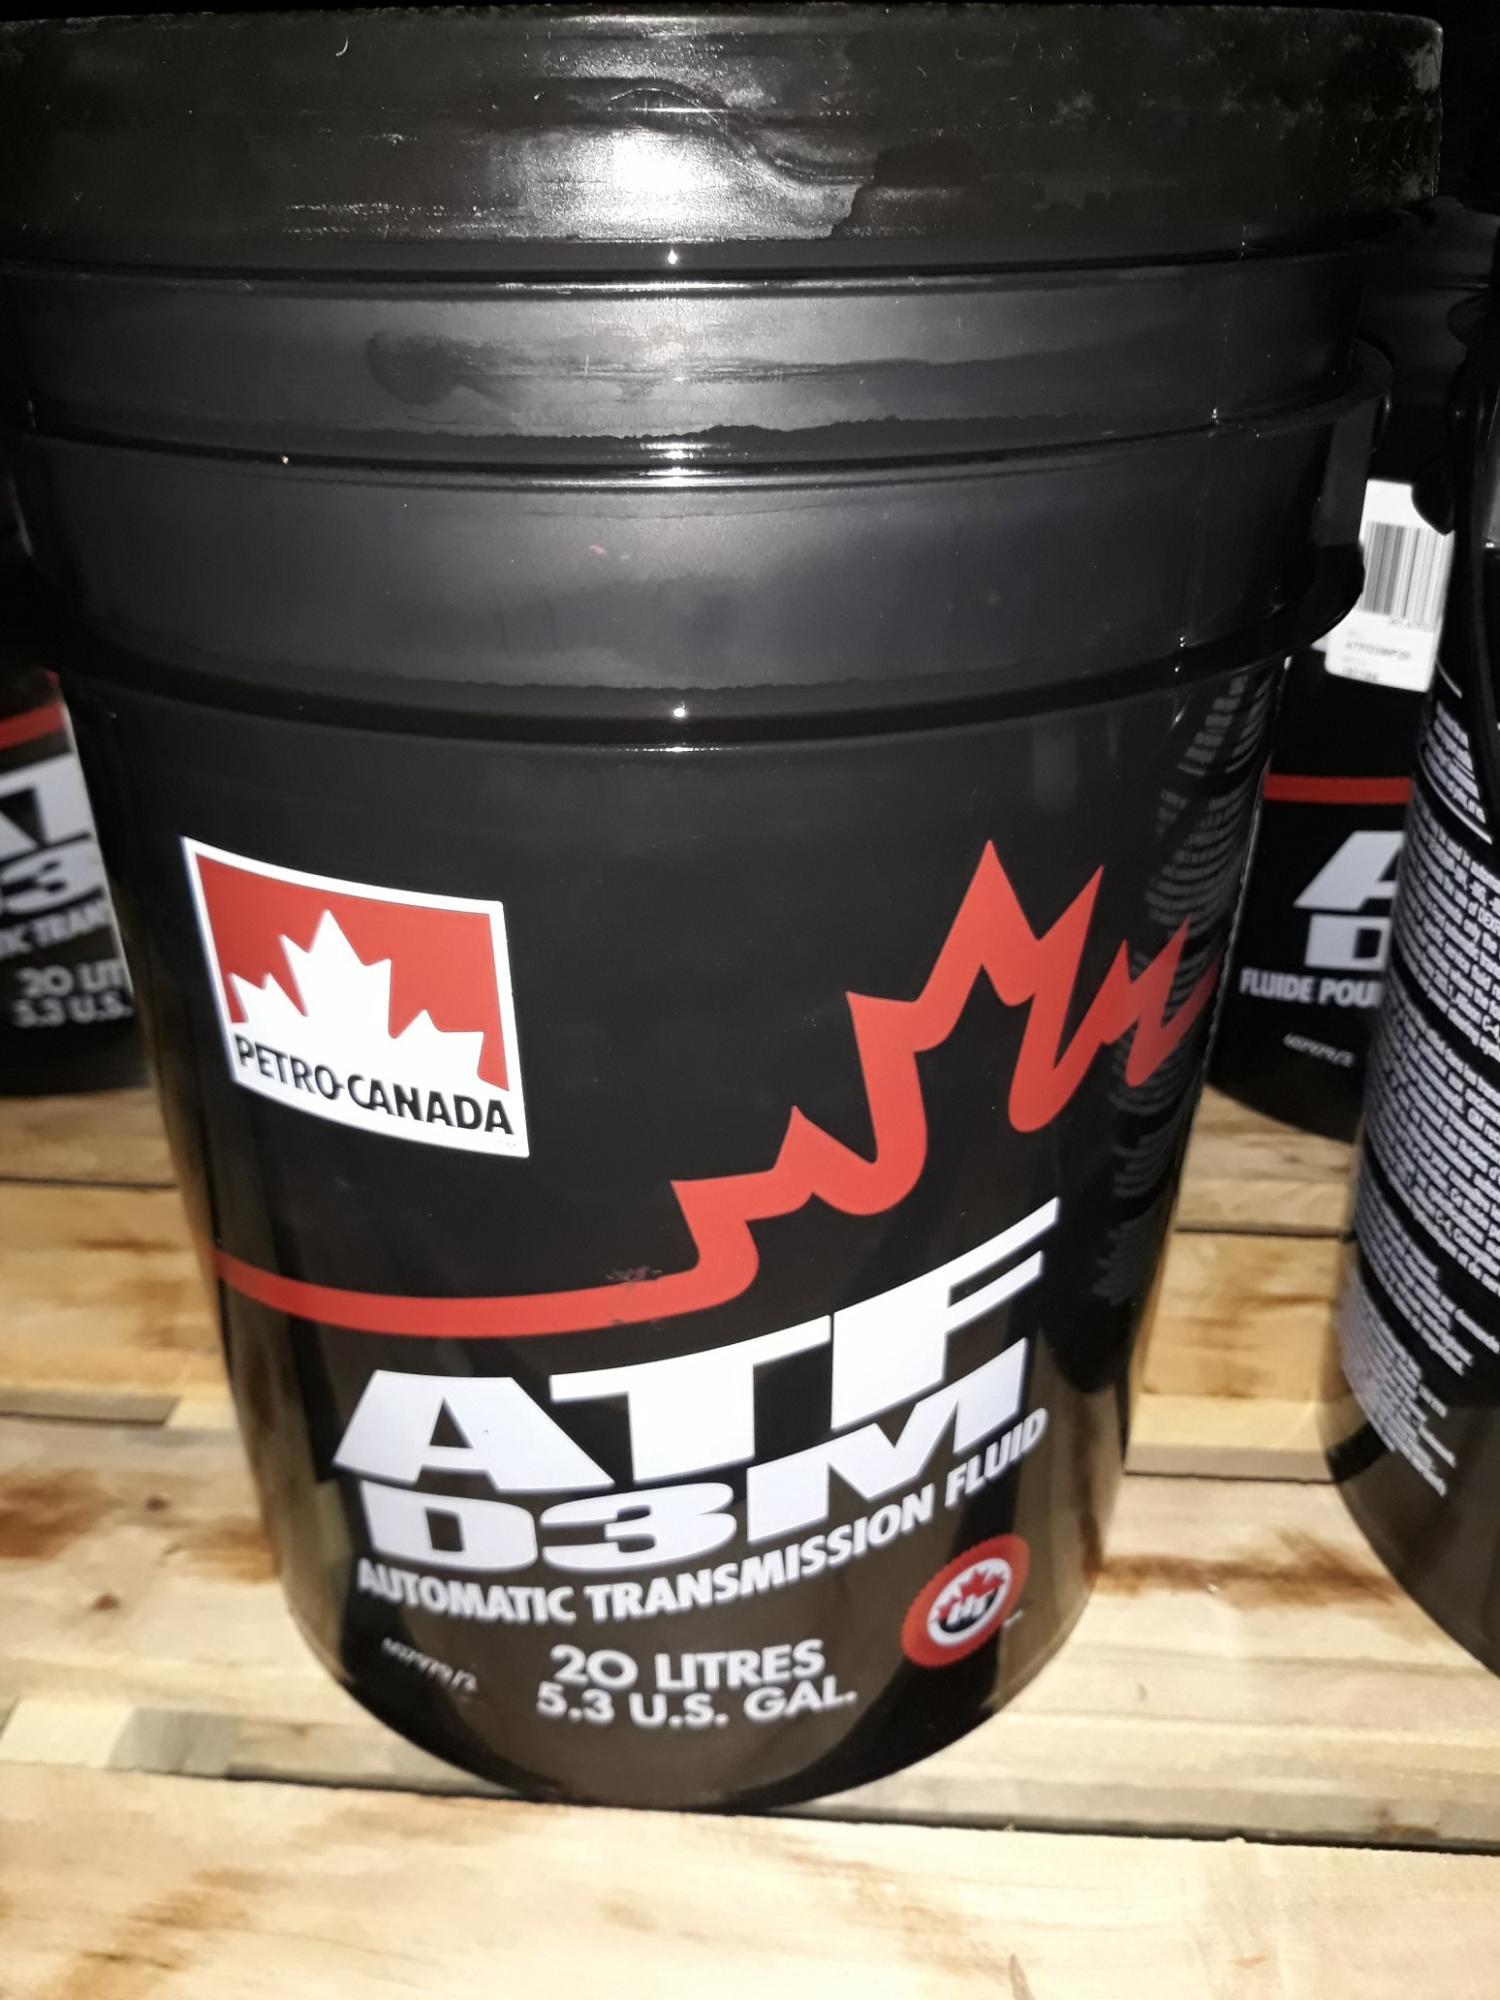 Canada atf. Petro-Canada ATF d3m. Масло Petro Canada ATF d3m. Petro-Canada ATF D-III (d3m). Petro-Canada ATF d3m Прадо 95.